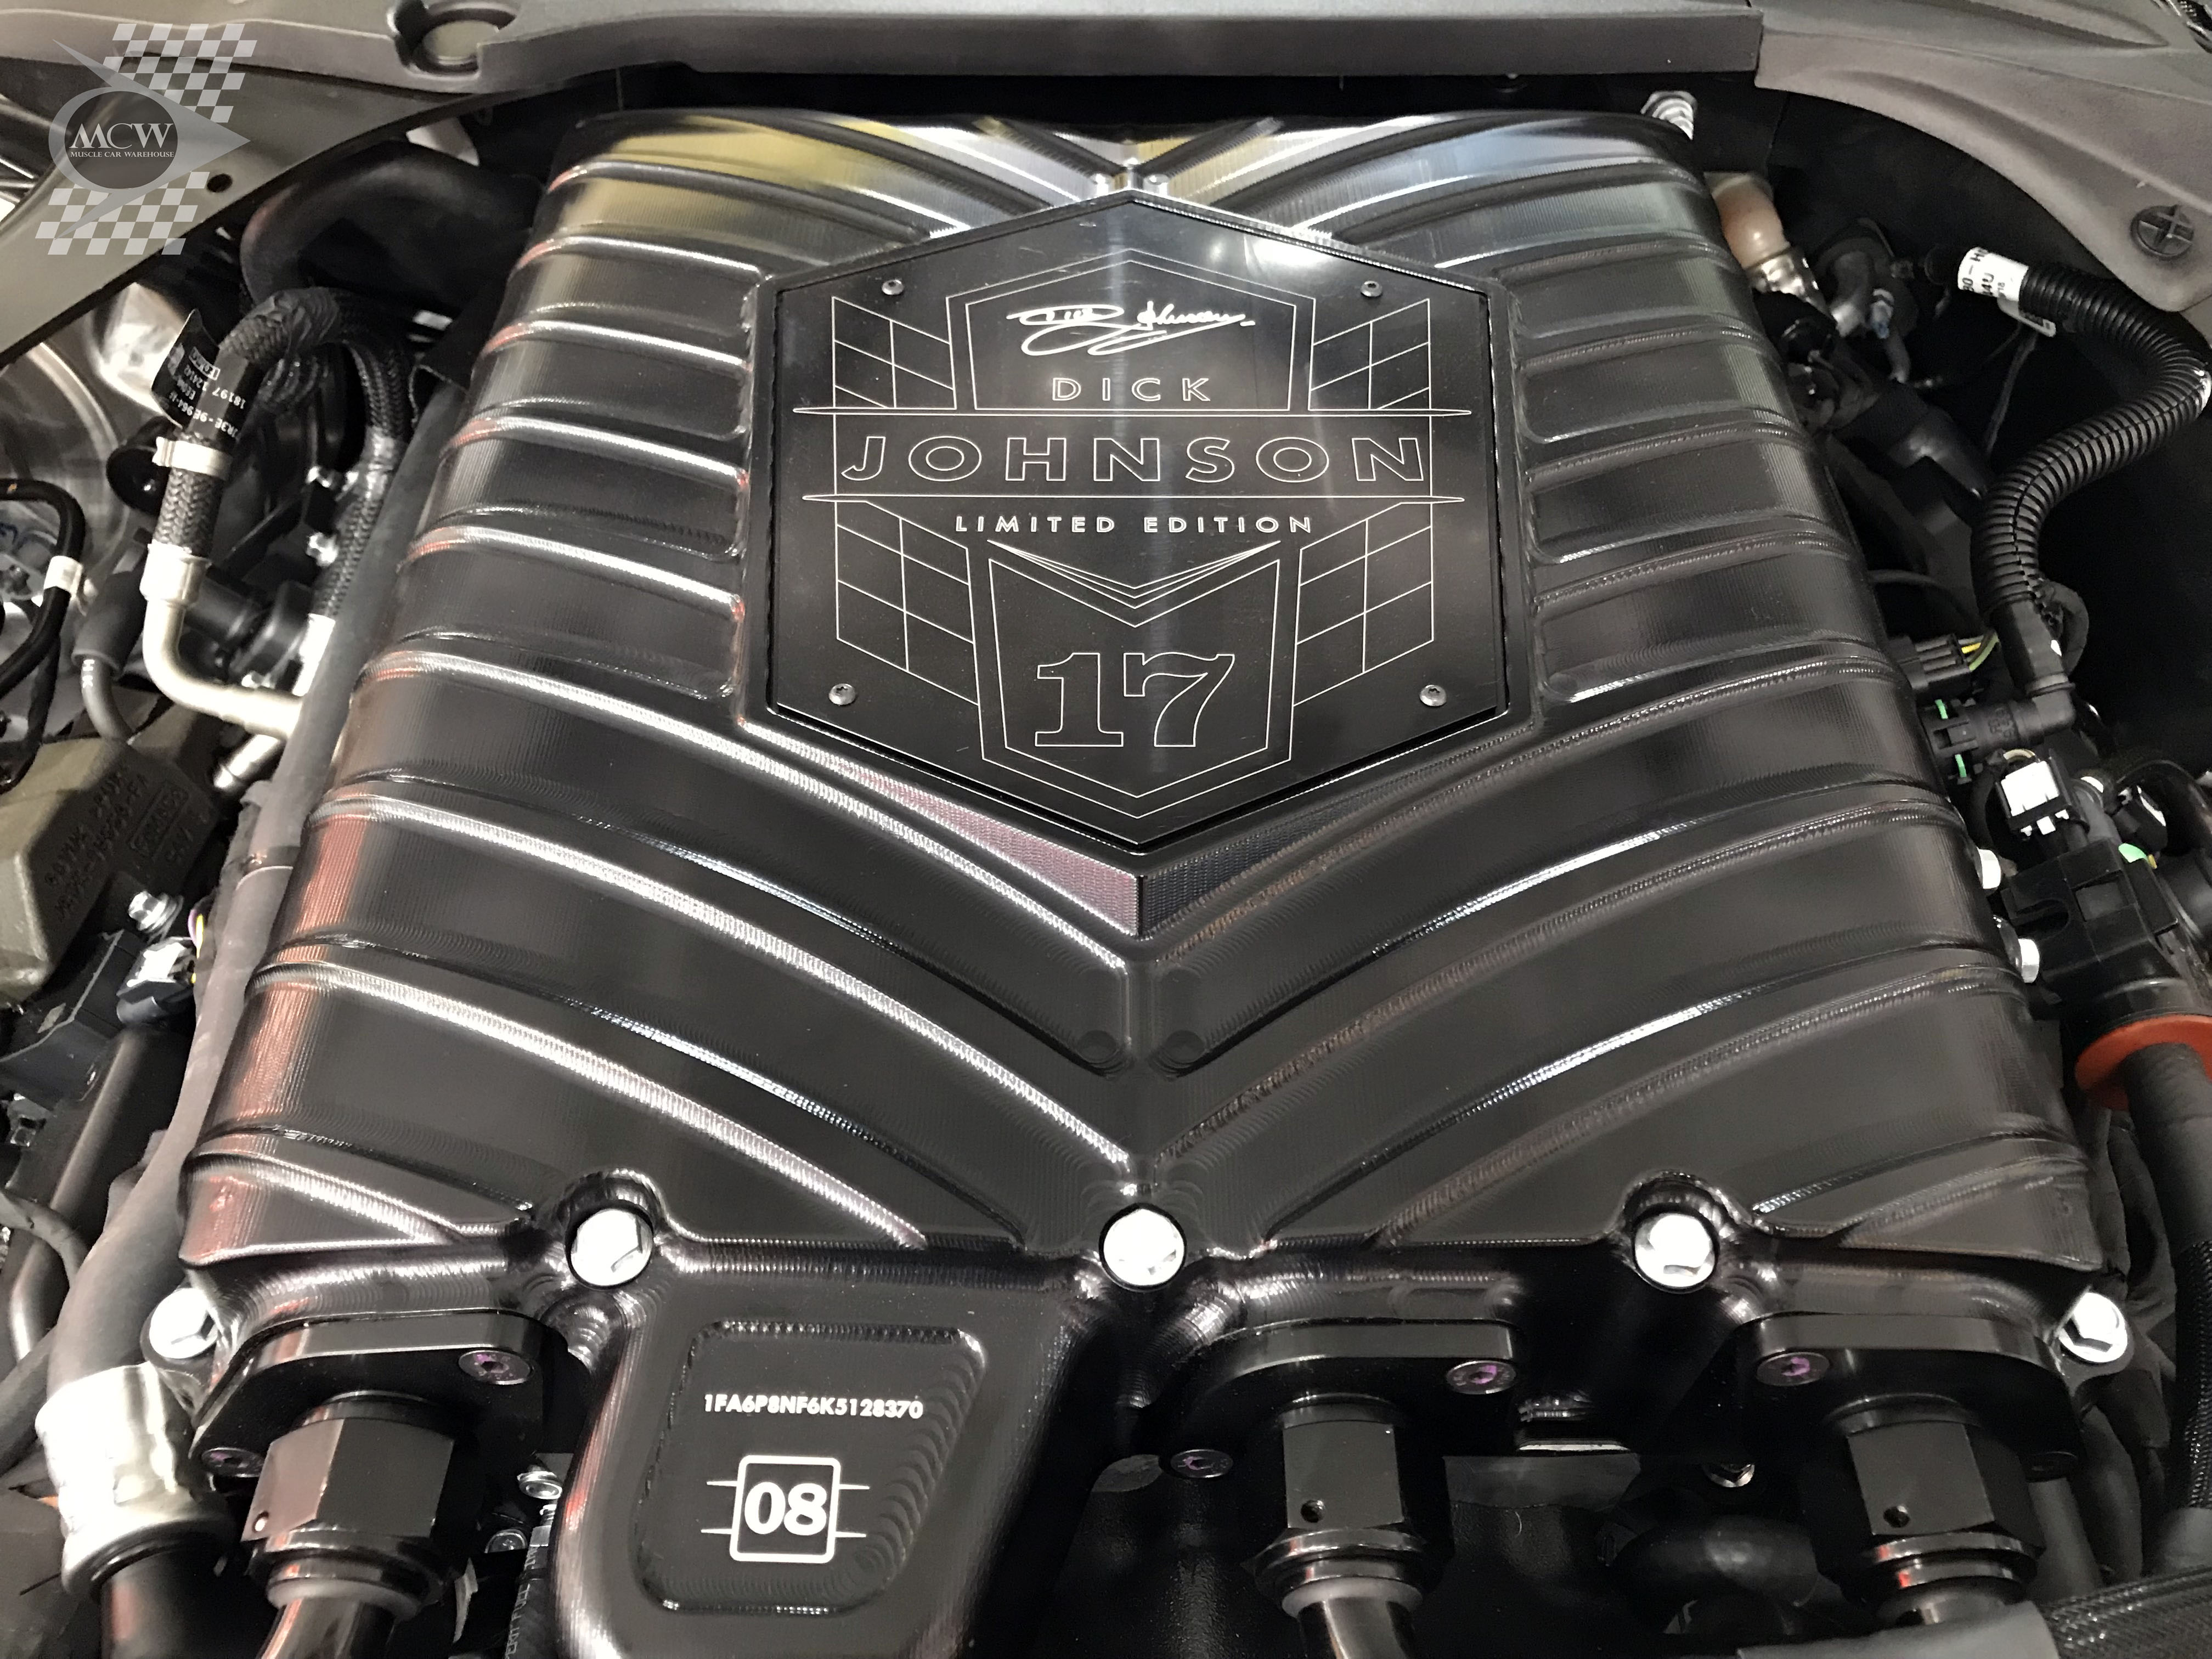 Ford Mustang DJR Engine | Muscle Car Warehouse